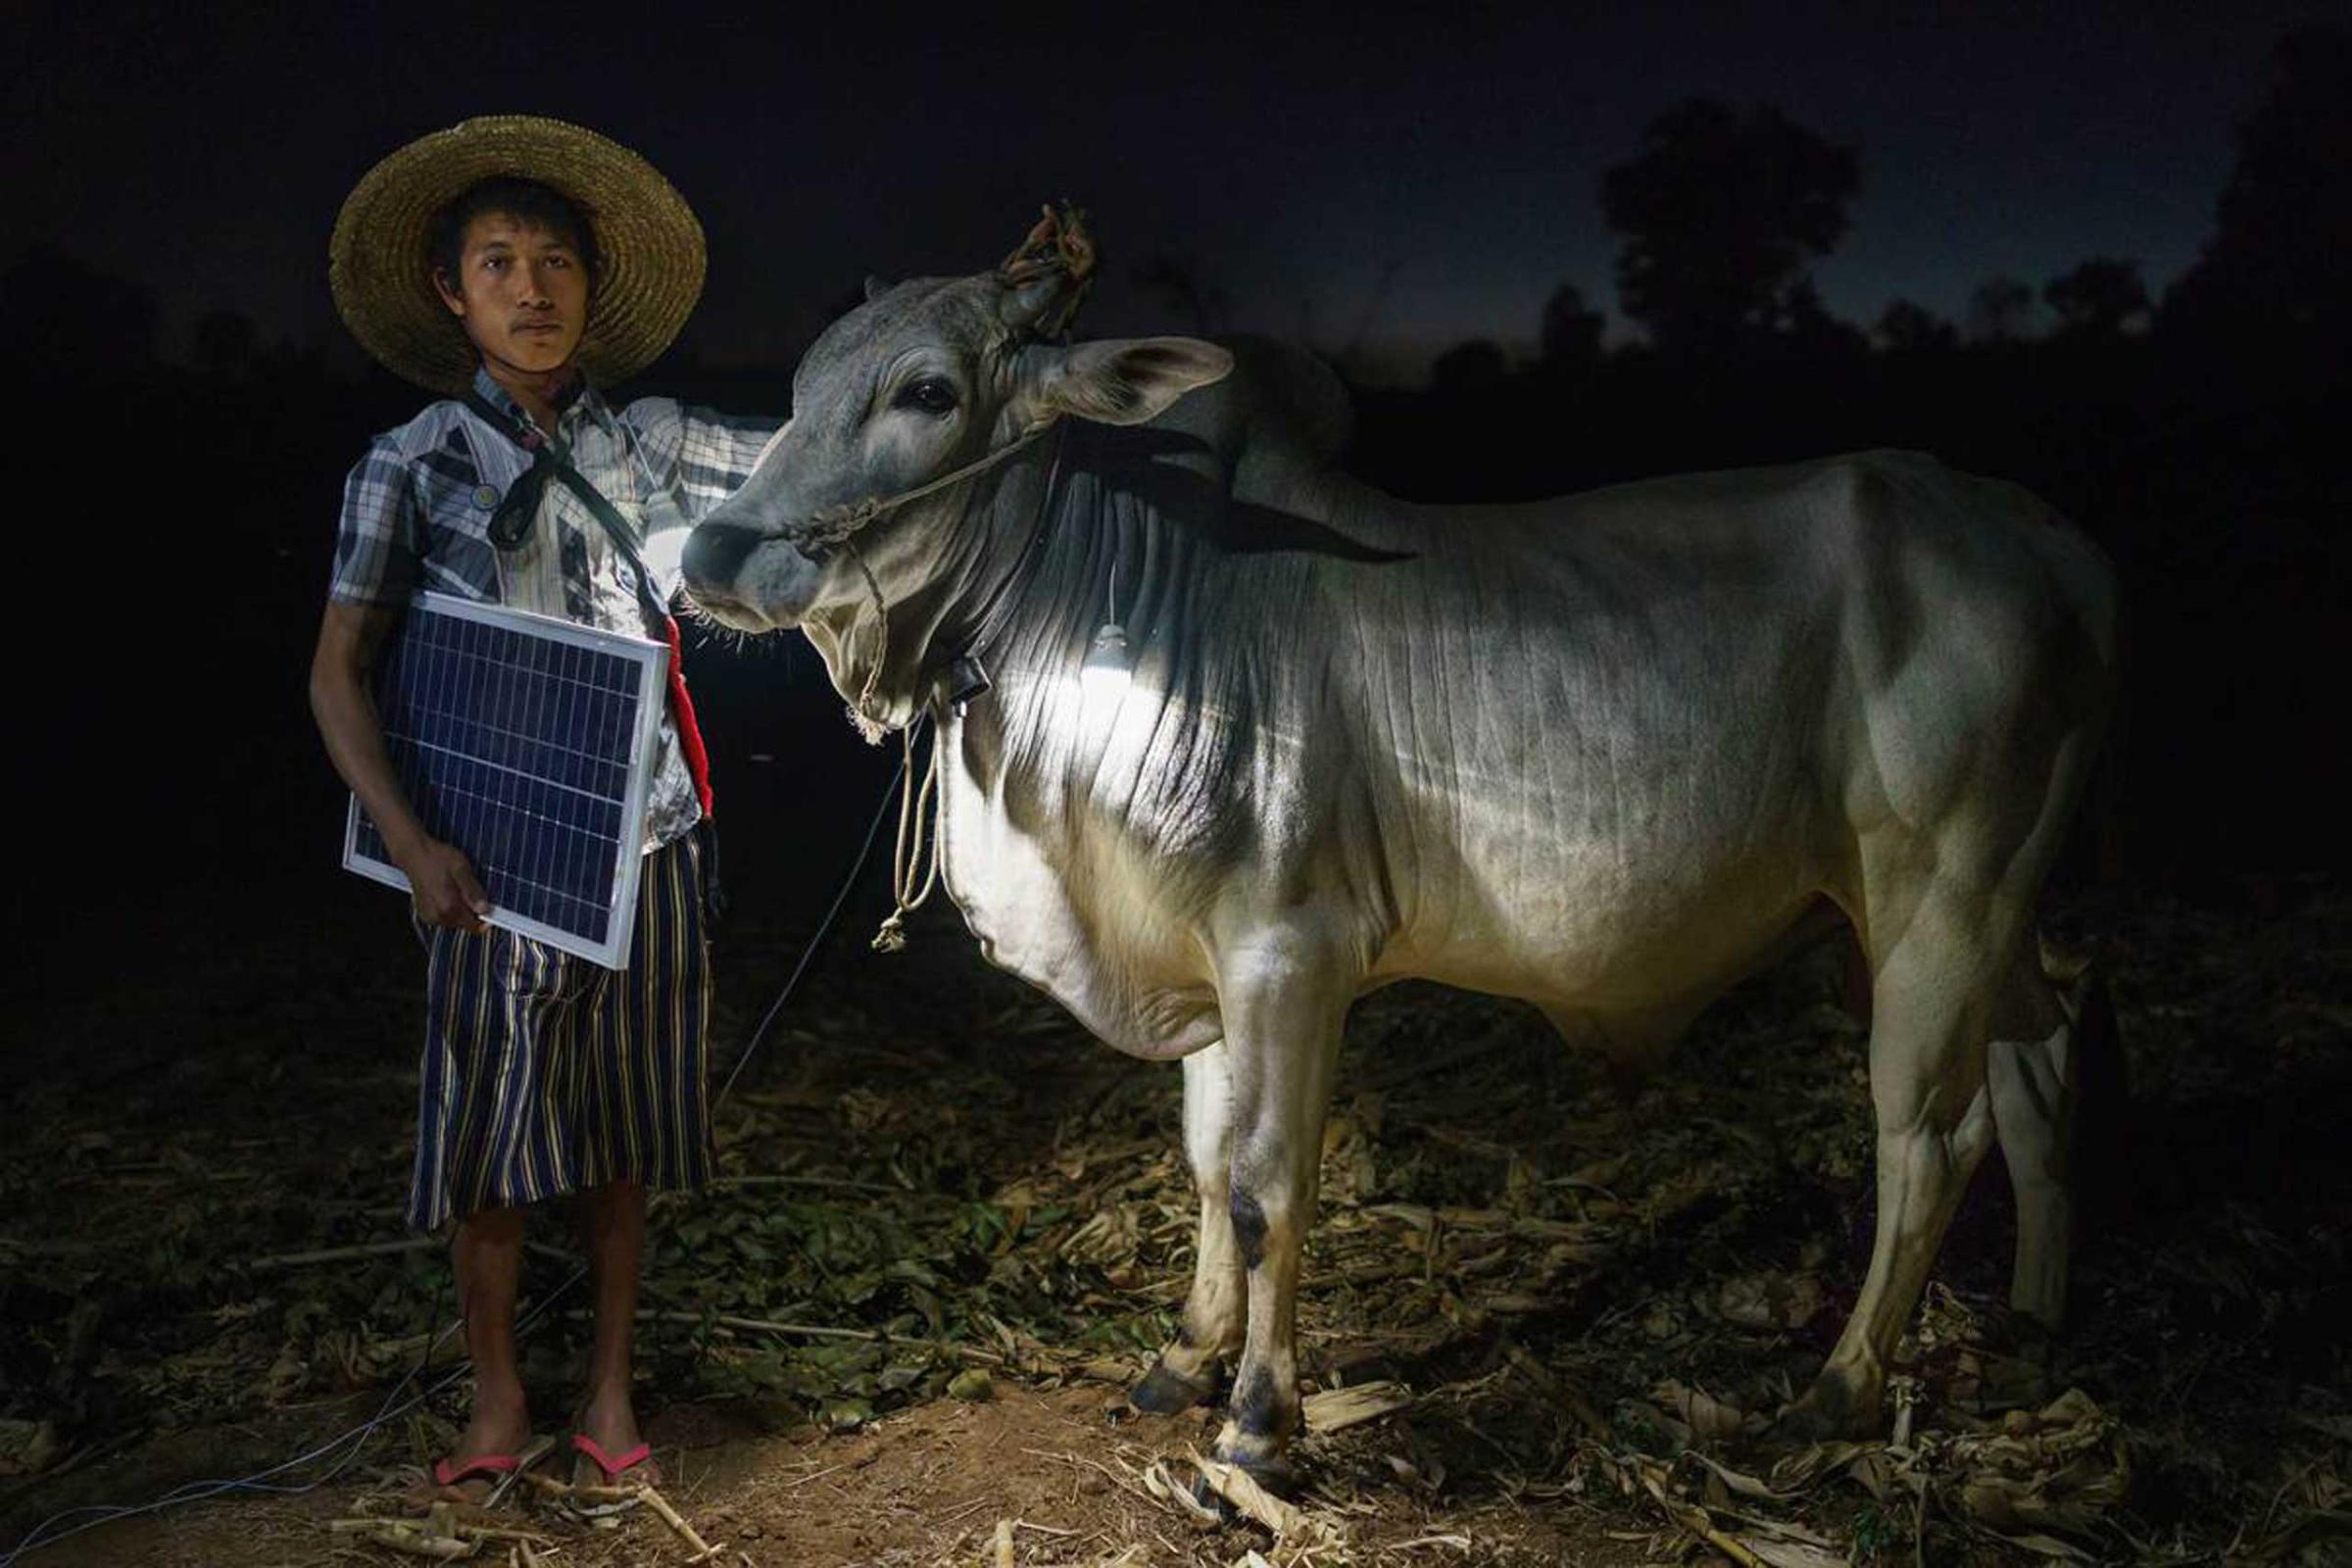 Mg Ko, 20 years old. A Shan farmer with his cow in Lui Pan Sone Village. Kayah State.